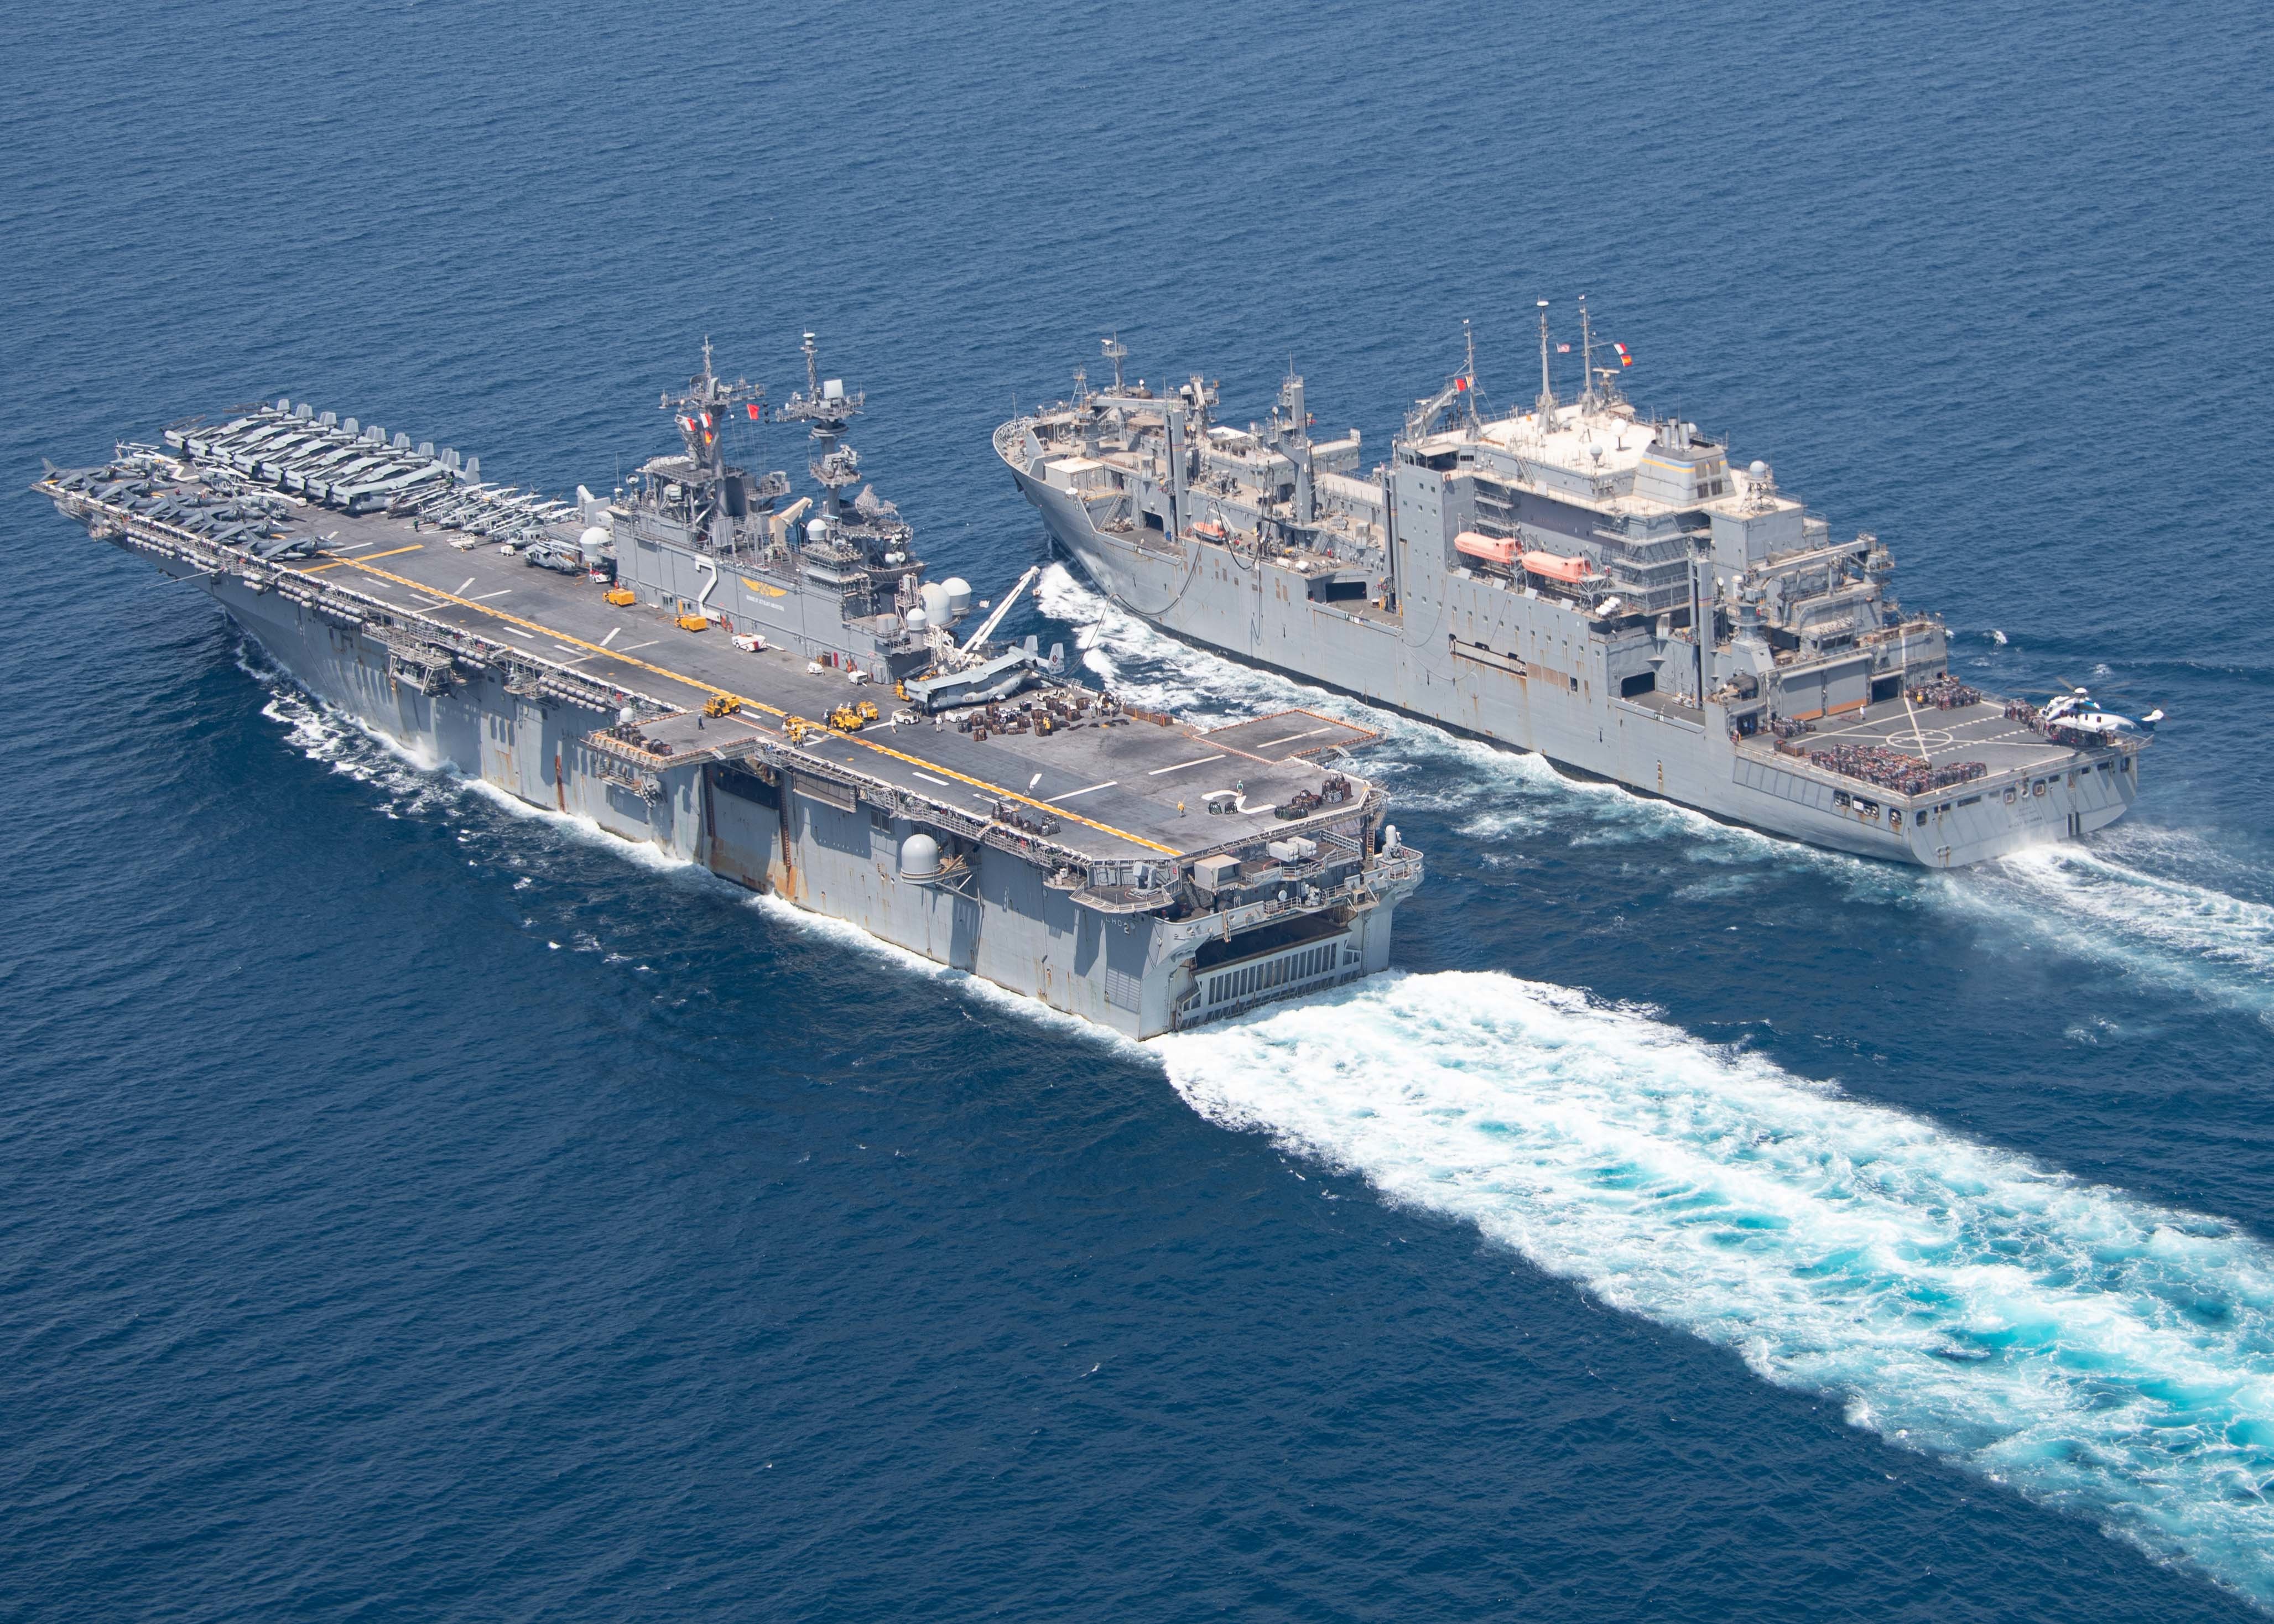 The dry cargo and ammunition ship USNS Wally Schirra (T-AKE 8), right, conducts a replenishment-at-sea (RAS) with the amphibious assault ship USS Essex (LHD 2), left, Sept. 18, 2021.